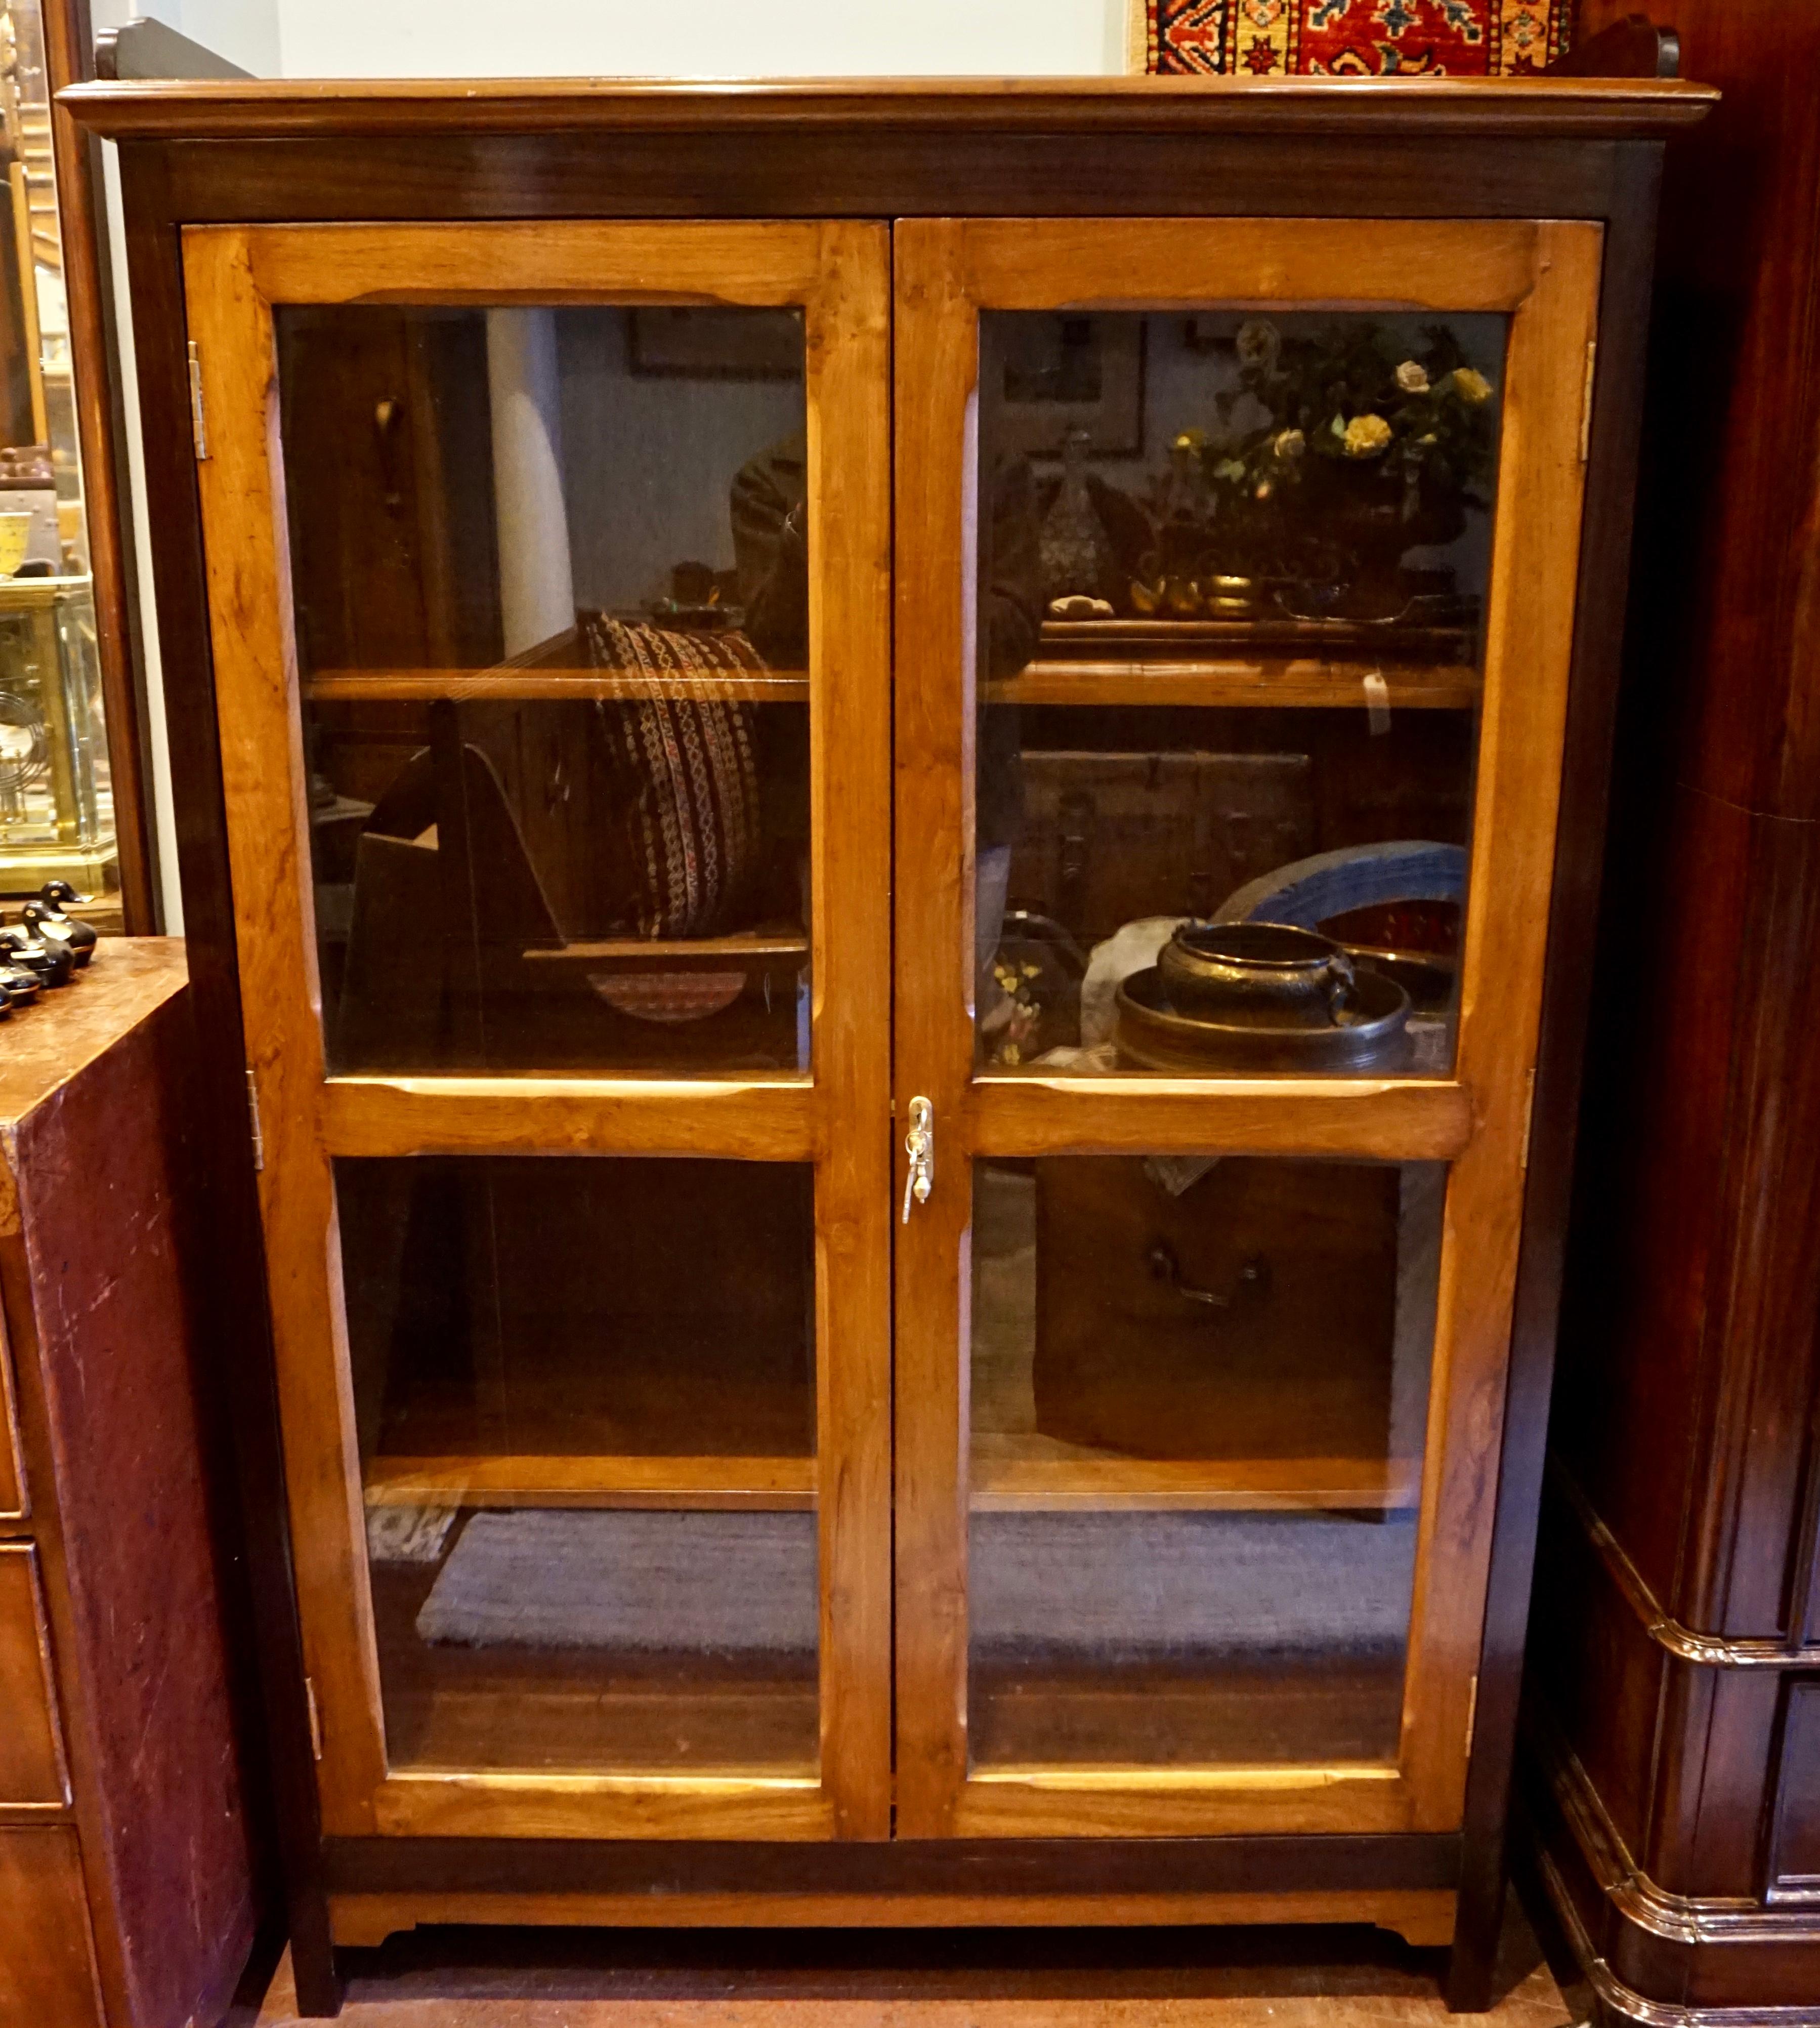 Circa 1930-35

Solid, refined two tone hand crafted teak and rosewood showcase/bookcase cabinet with sturdy teak removable shelves and locking doors. Renewed hardware. Peg work joinery. Versatile.